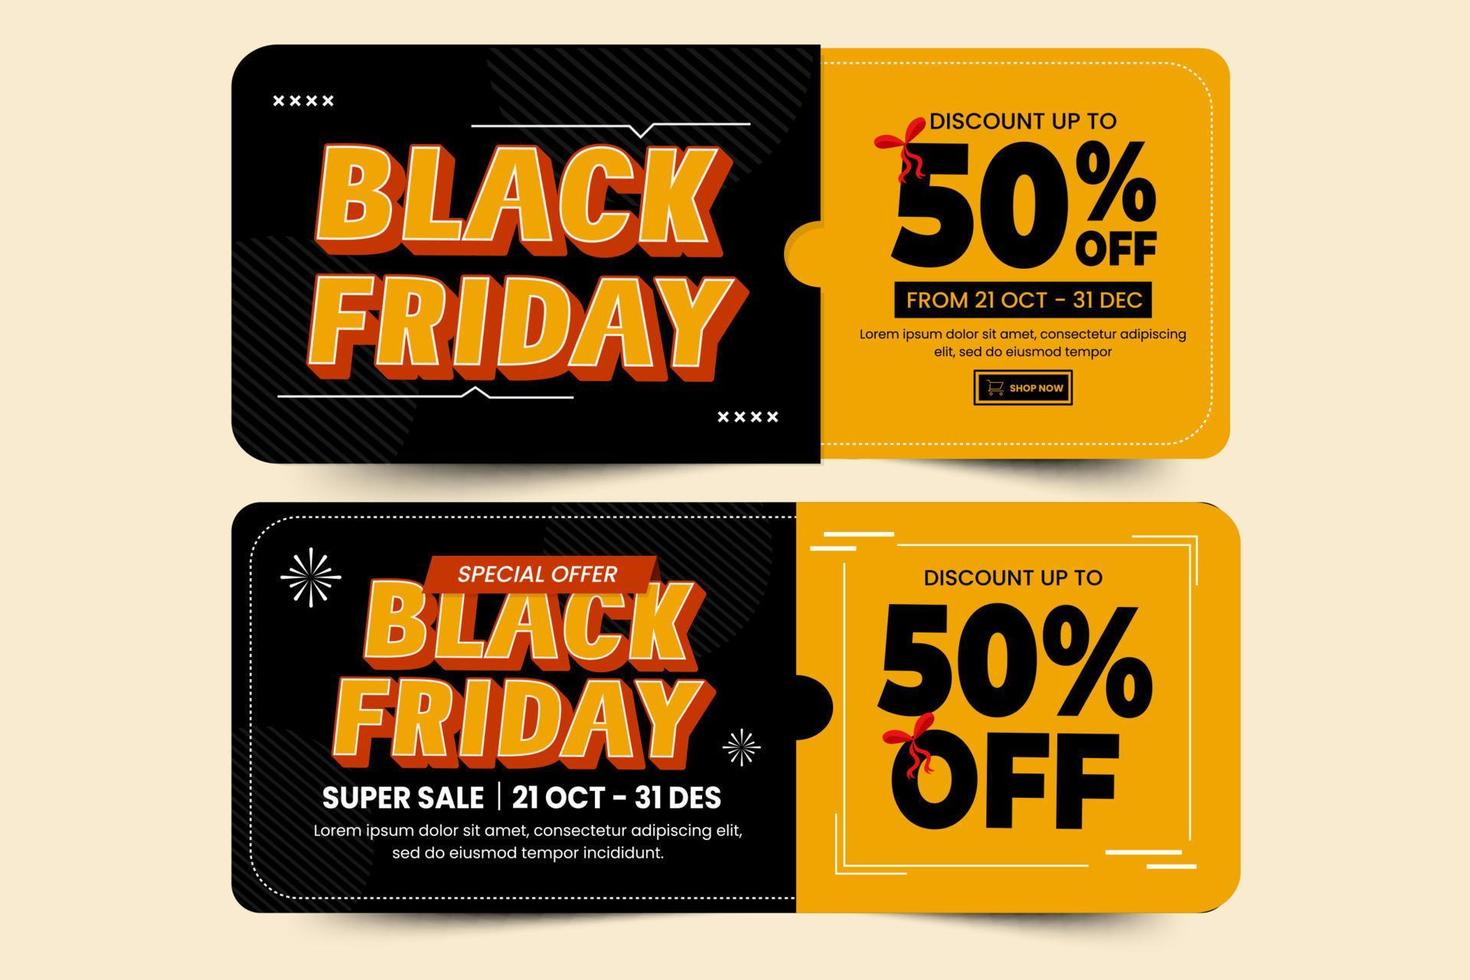 Black Friday Sale Voucher or Coupon Design Template vector